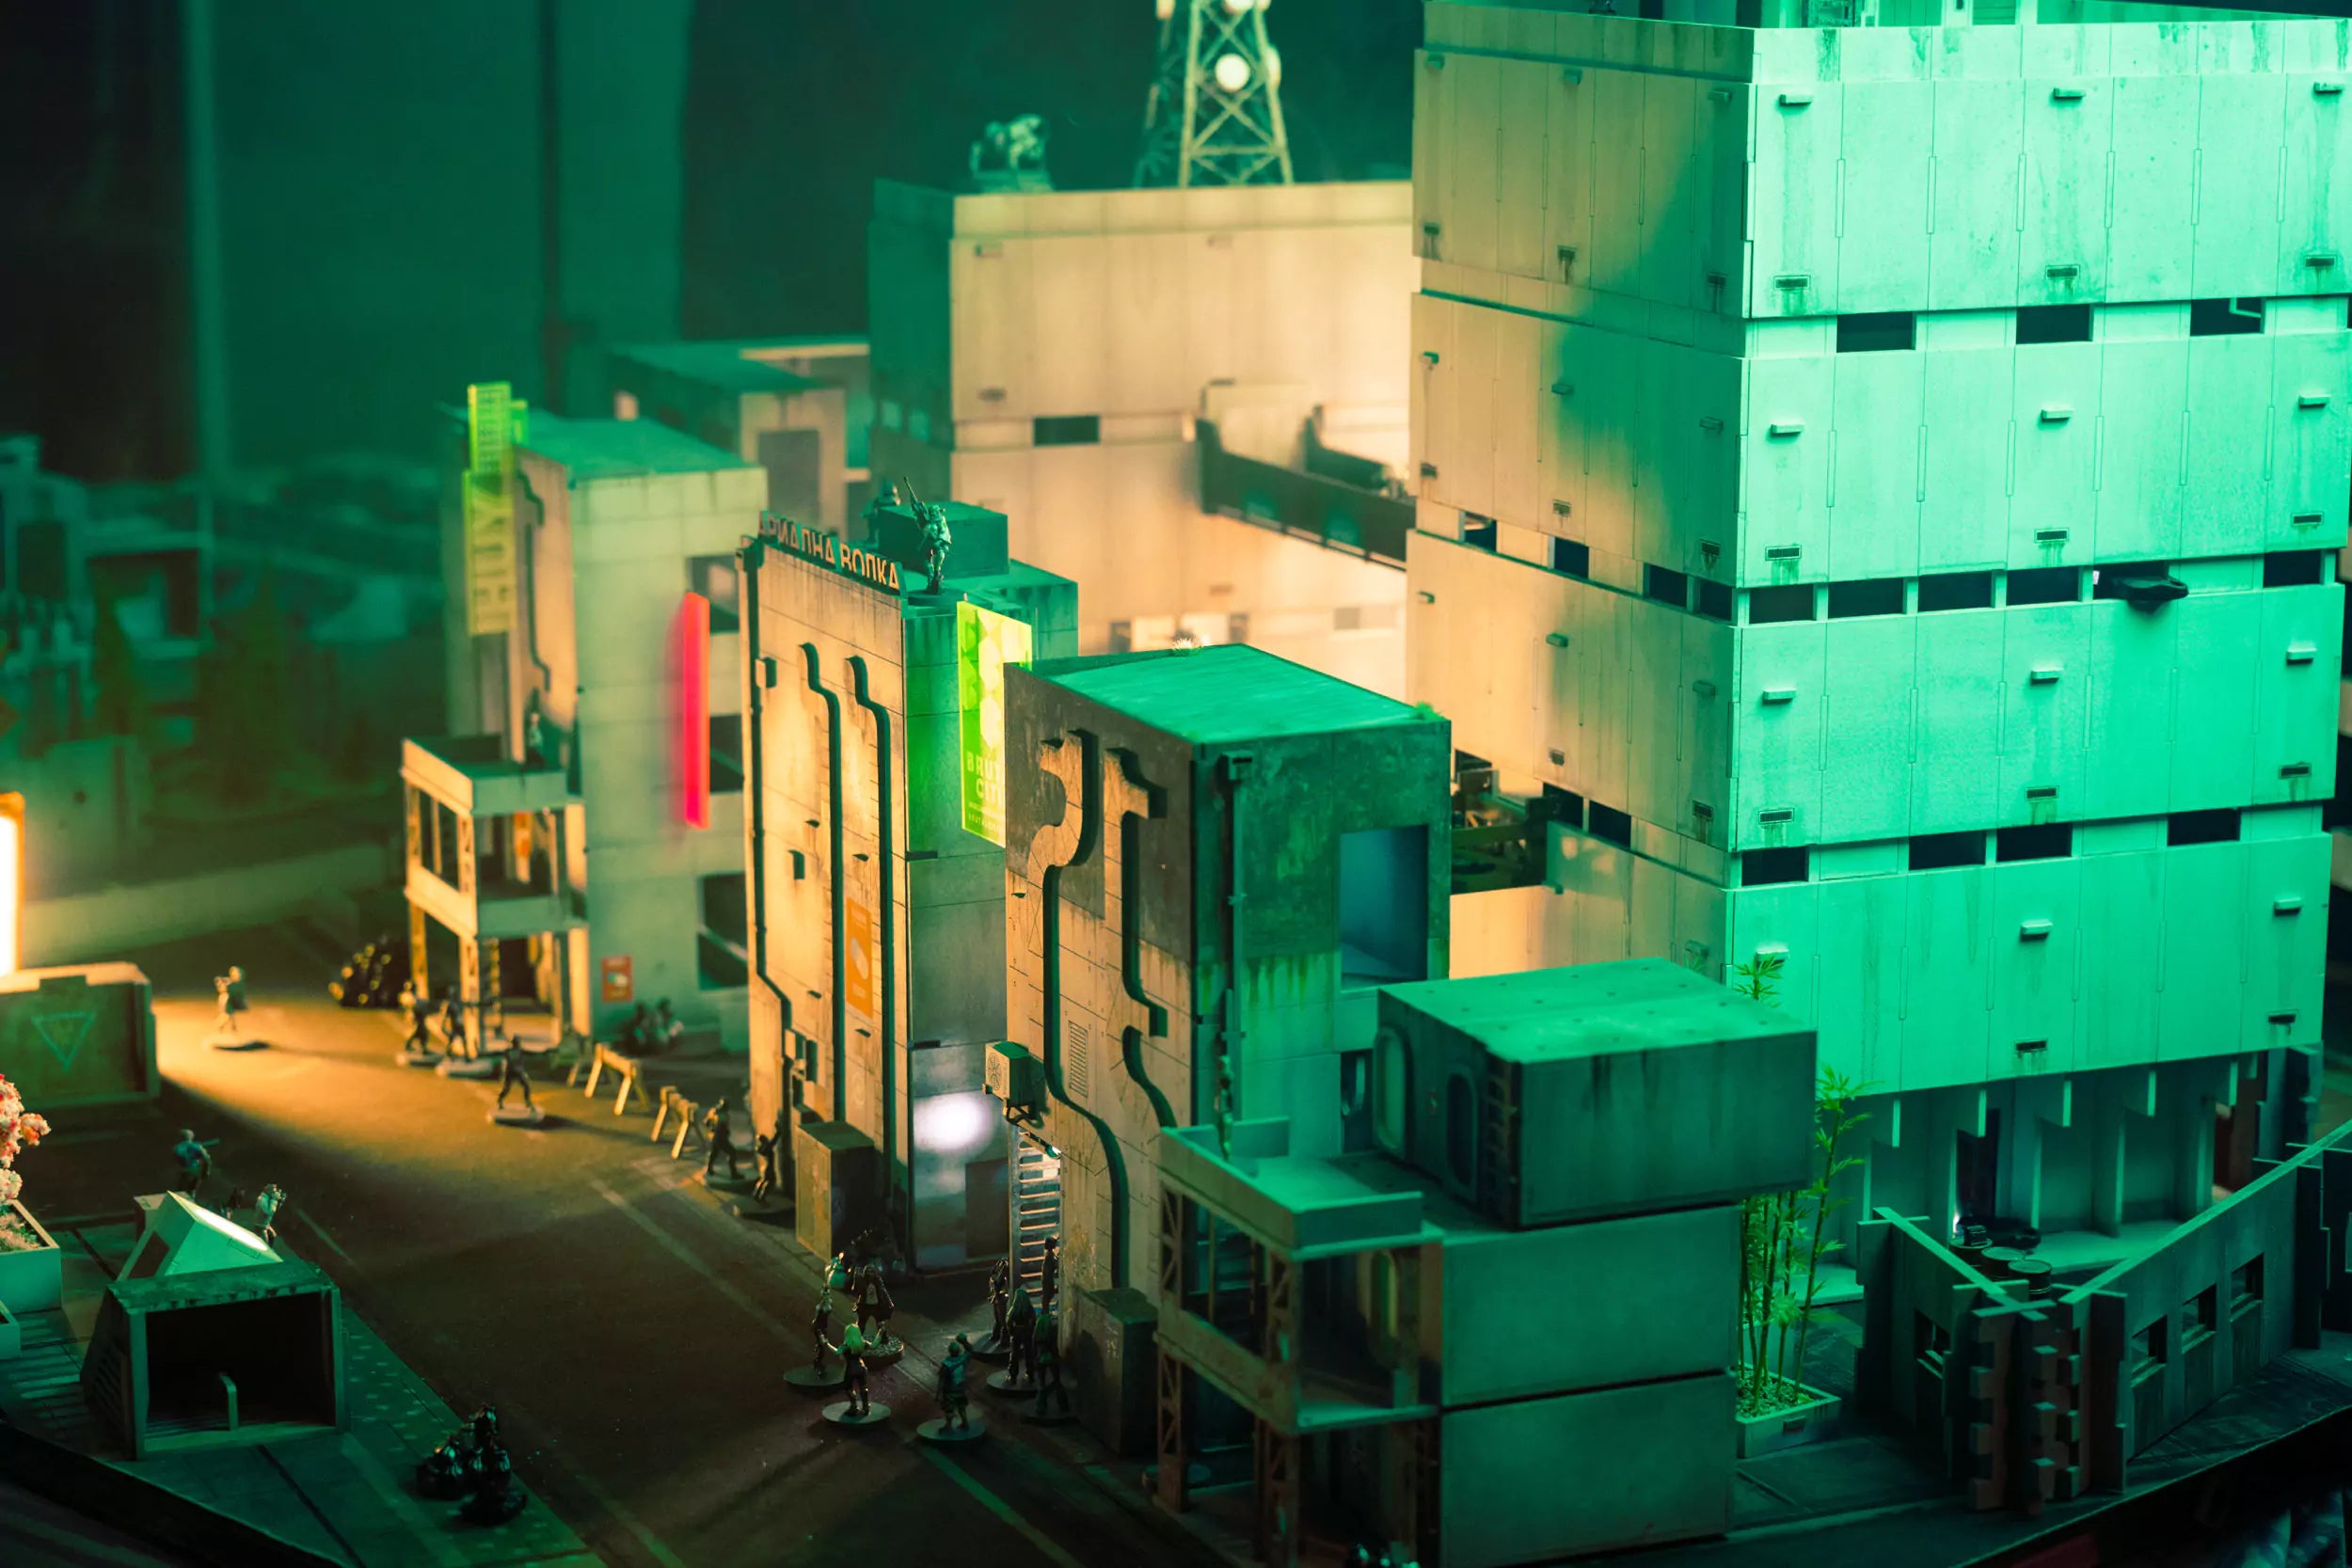 cyberpunk urban terrain with gangs fighting in the streets and neon lights